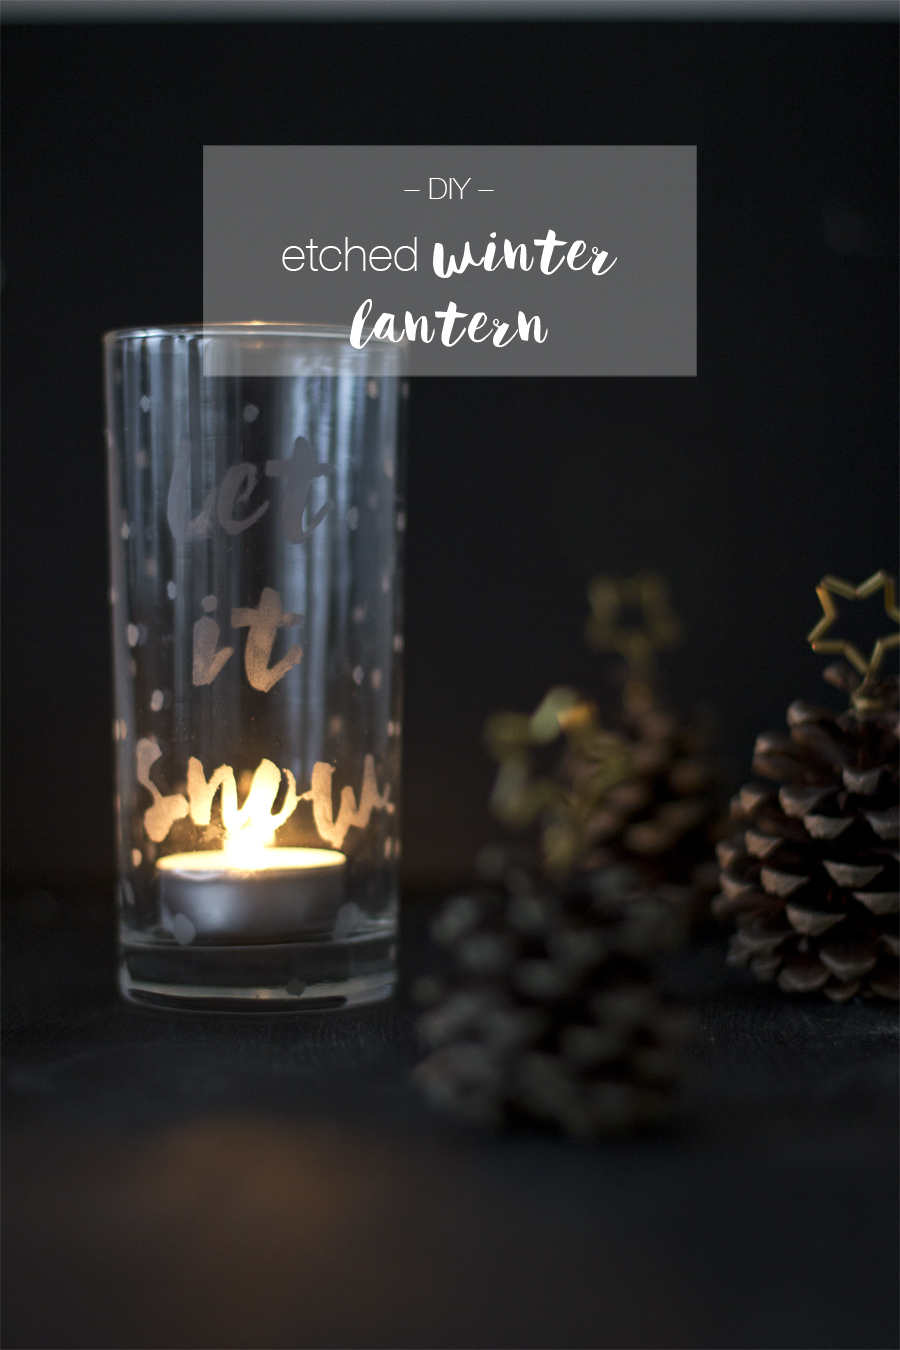 Glass etched winter lantern DIY | LOOK WHAT I MADE ...